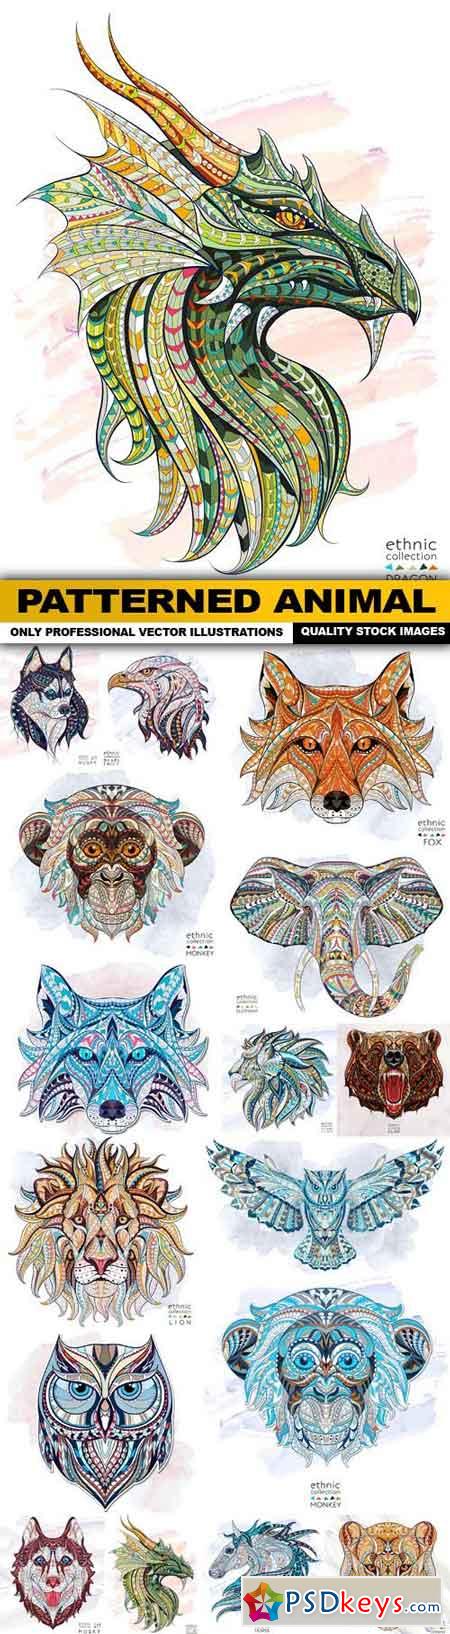 Patterned Animal - 16 Vector